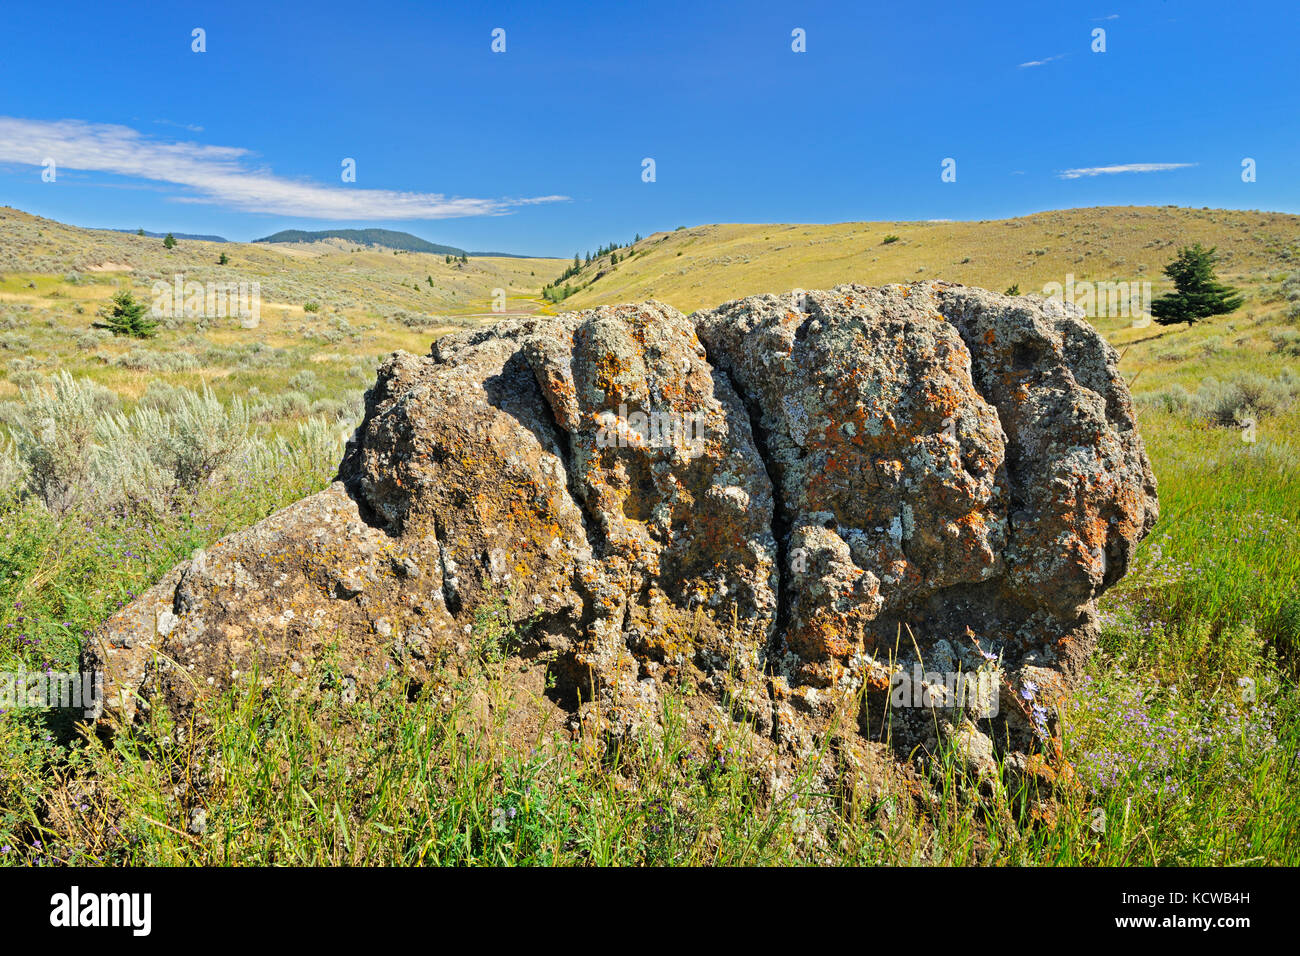 Rock in praterie. thompson valley, Kamloops, British Columbia, Canada Foto Stock